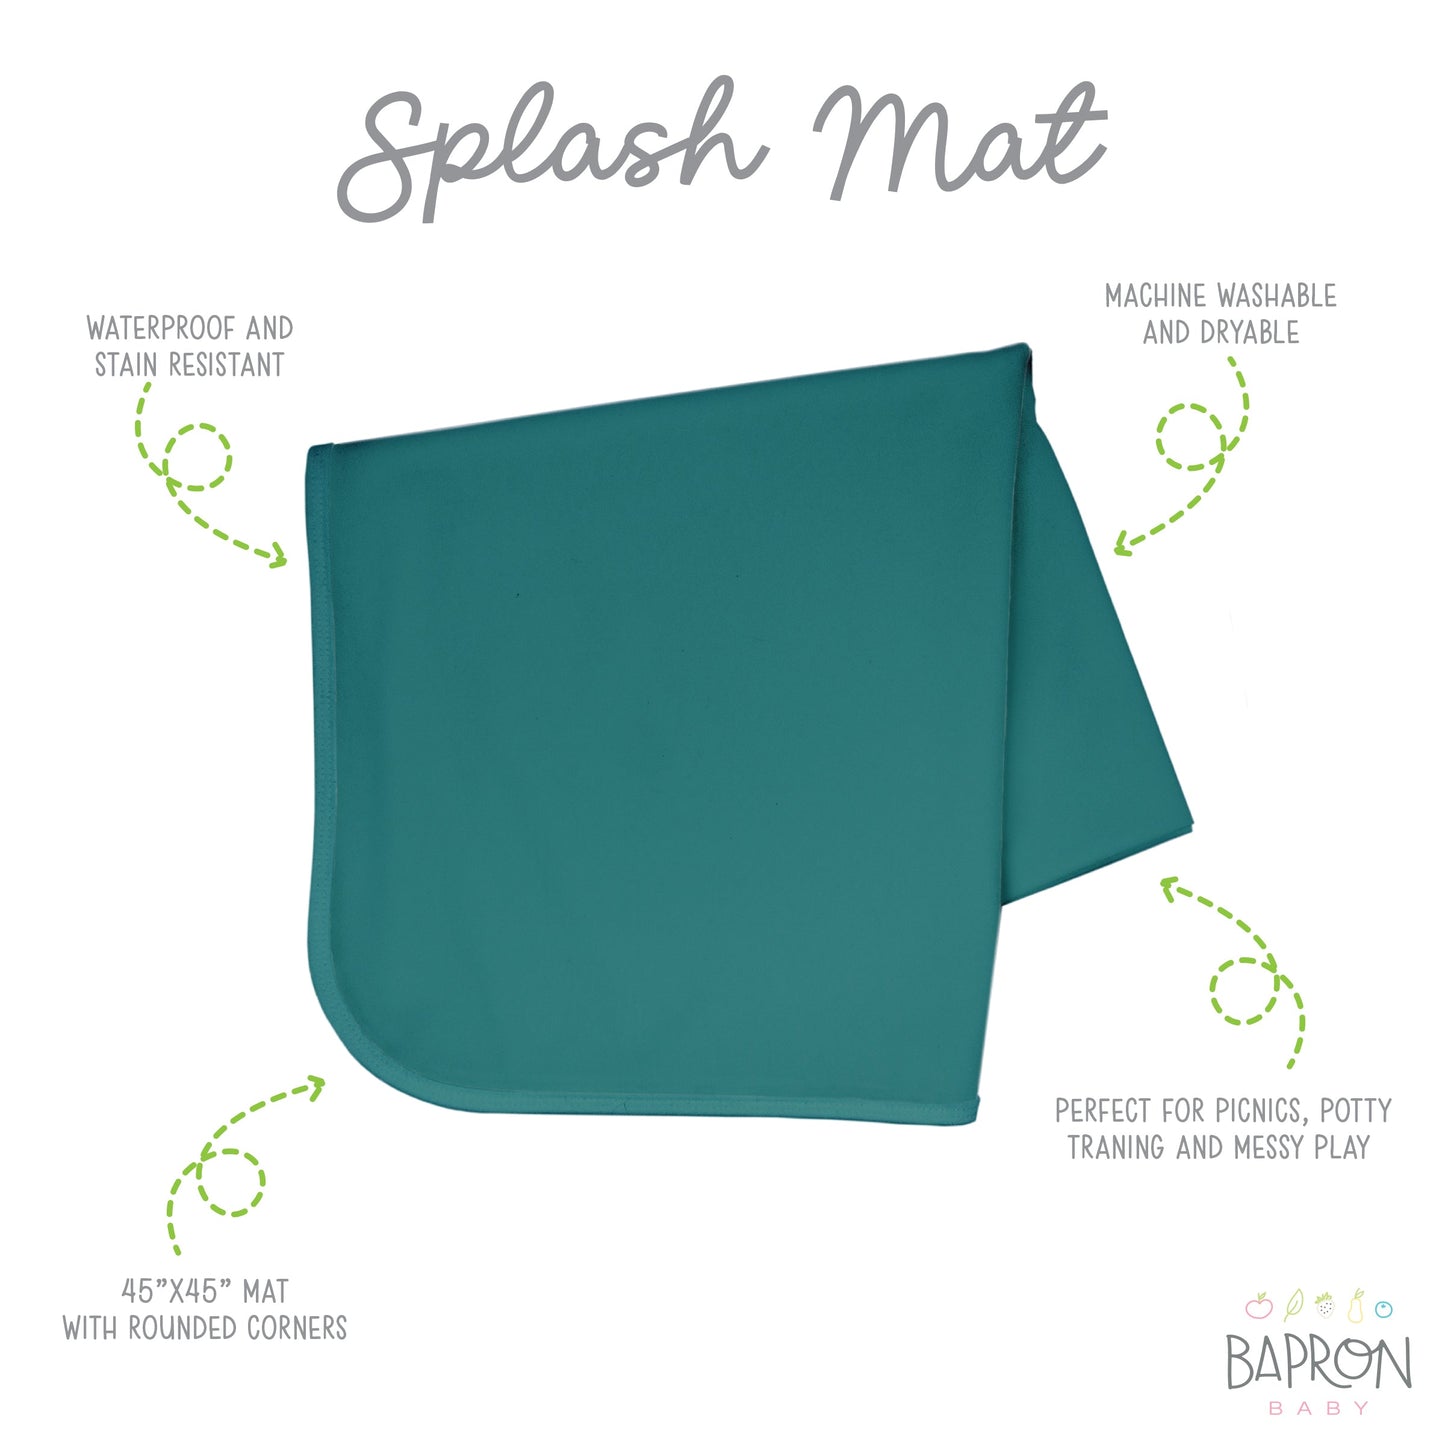 Teal Splash Mat - A Waterproof Catch-All for Highchair Spills and More! - WERONE